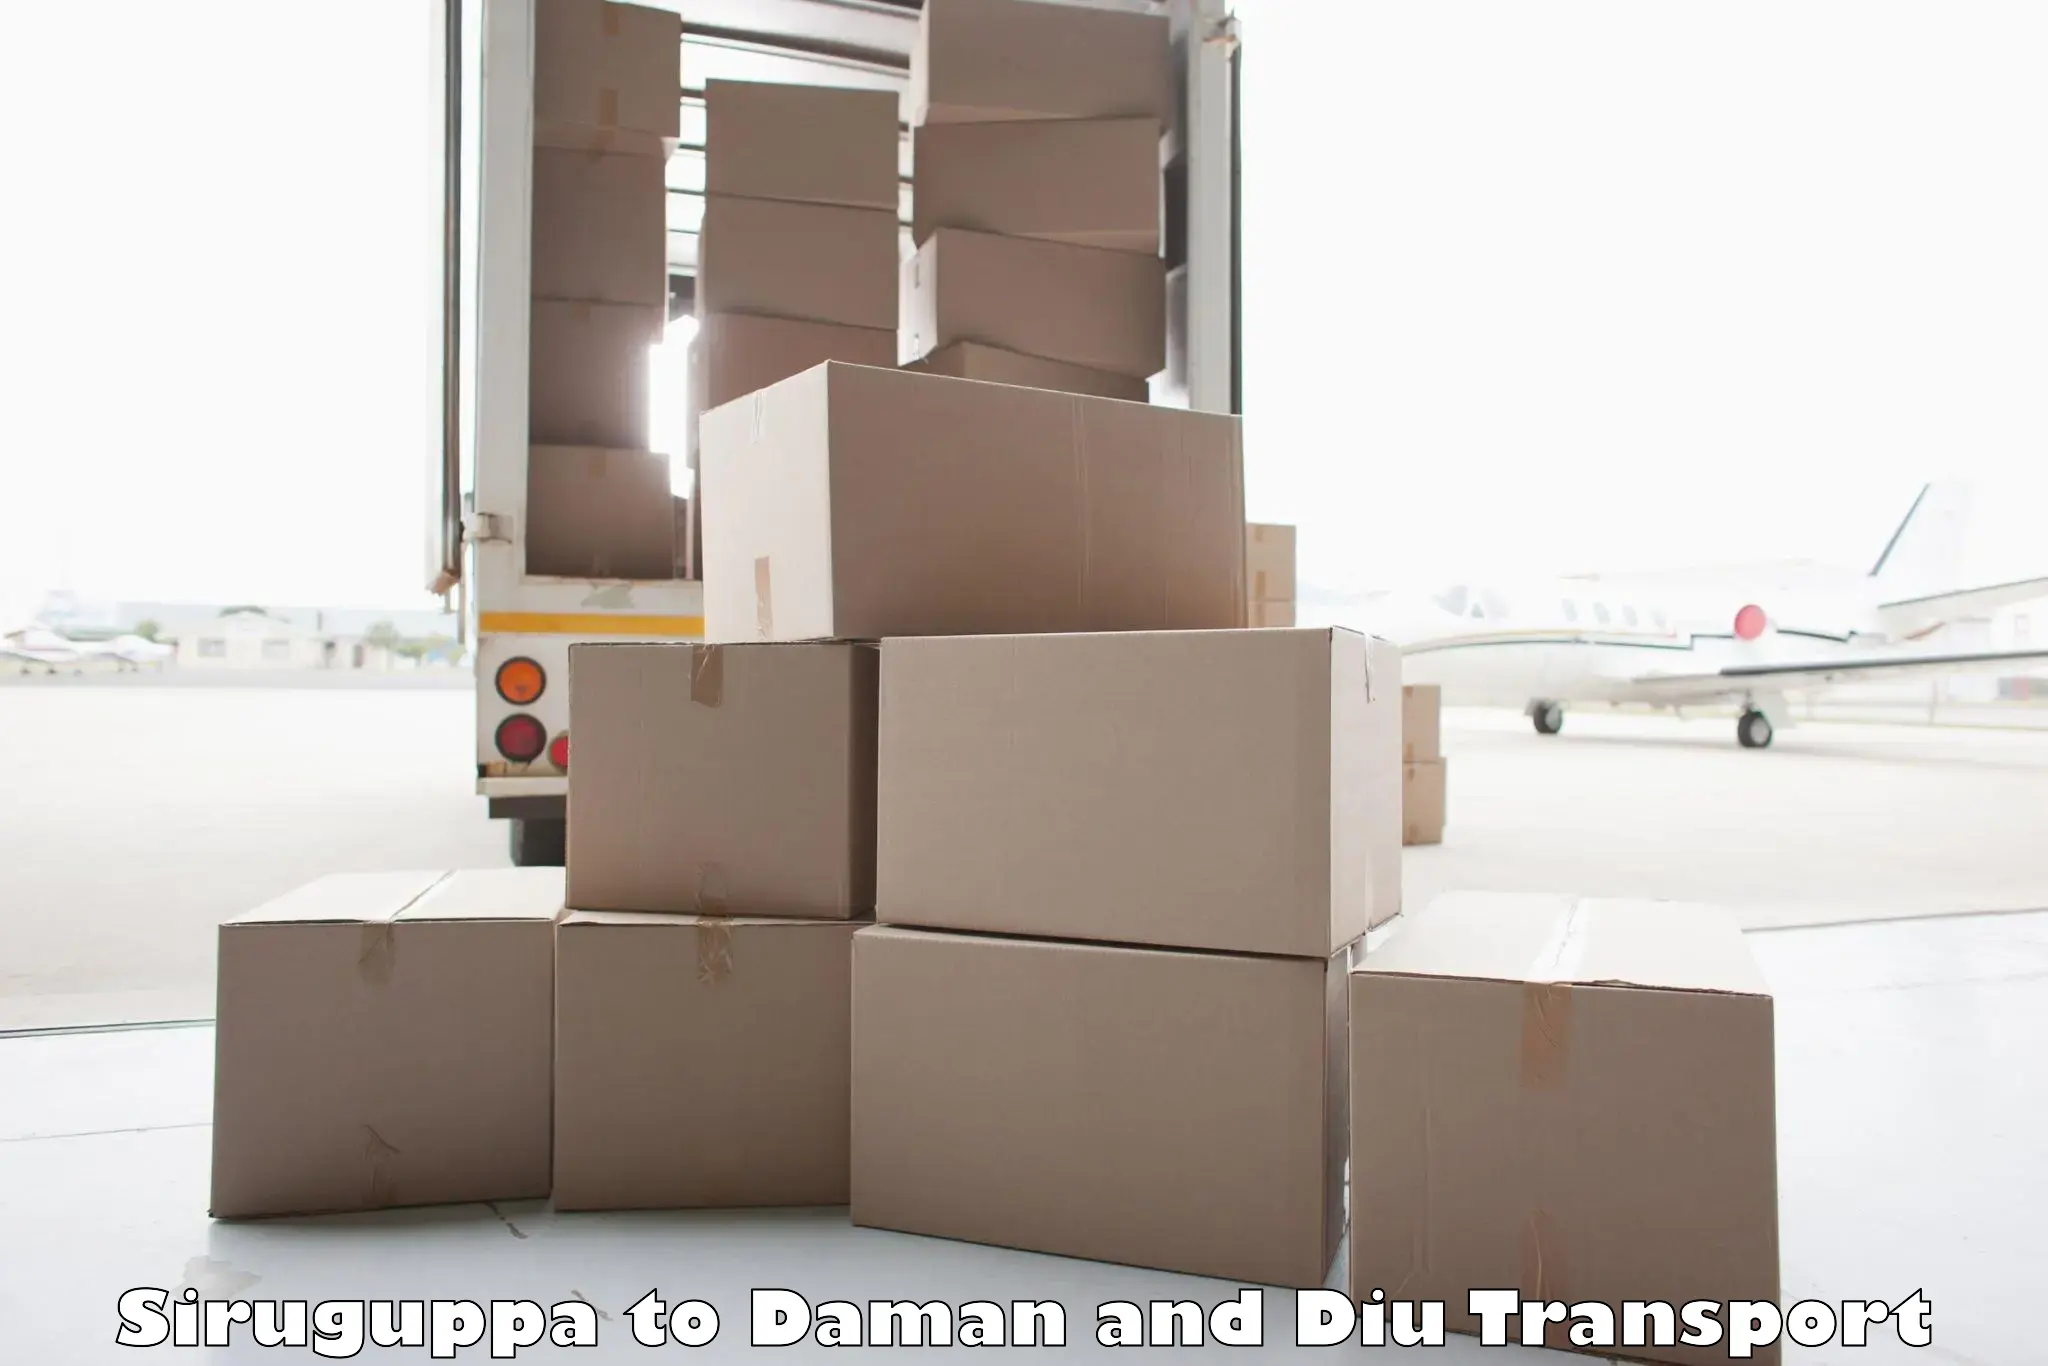 Daily parcel service transport Siruguppa to Daman and Diu